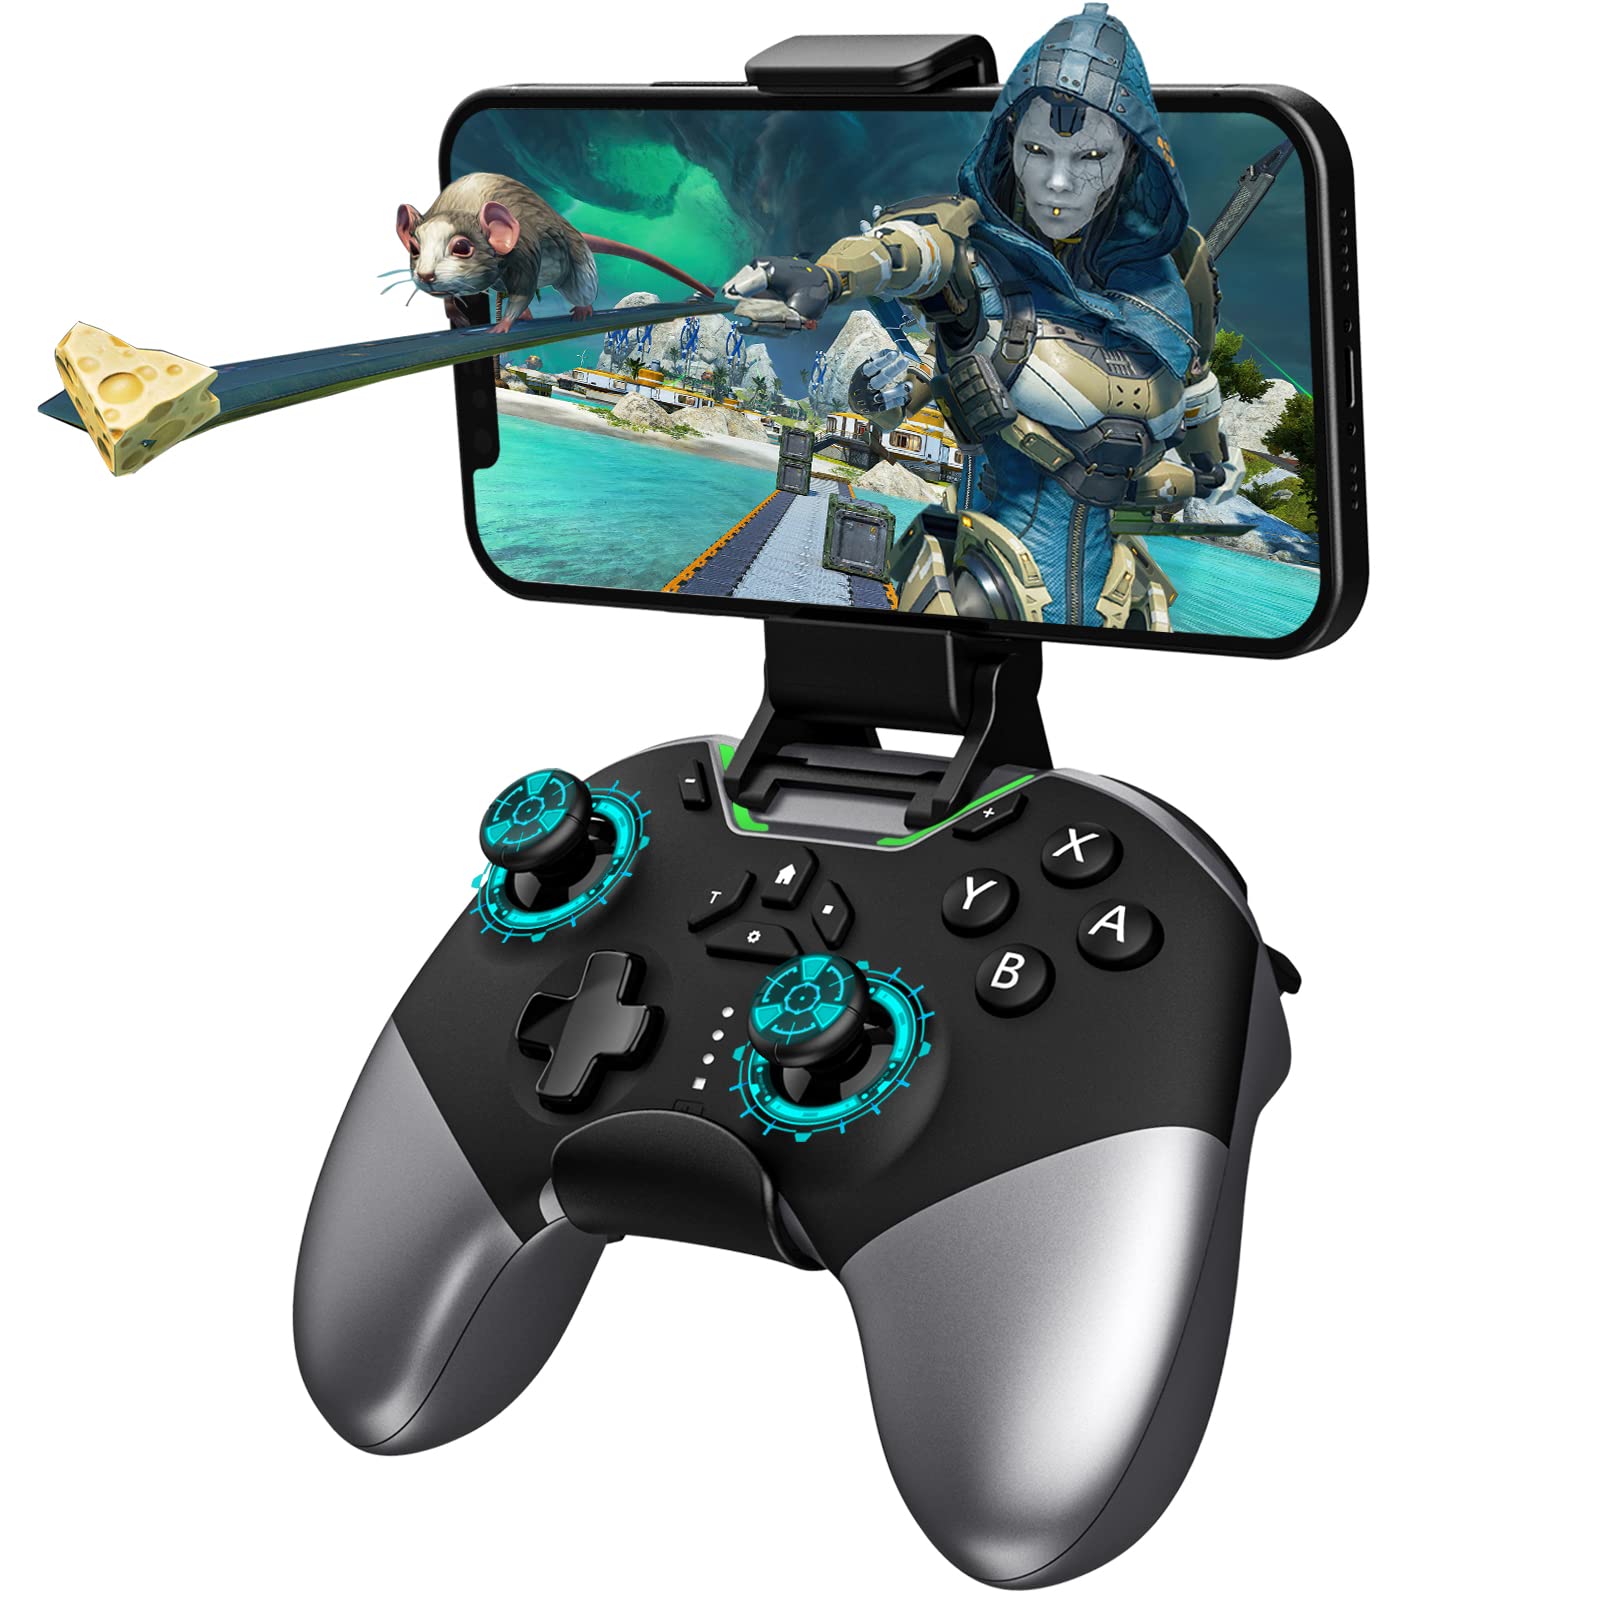 The Best Android GamePad in 2022 